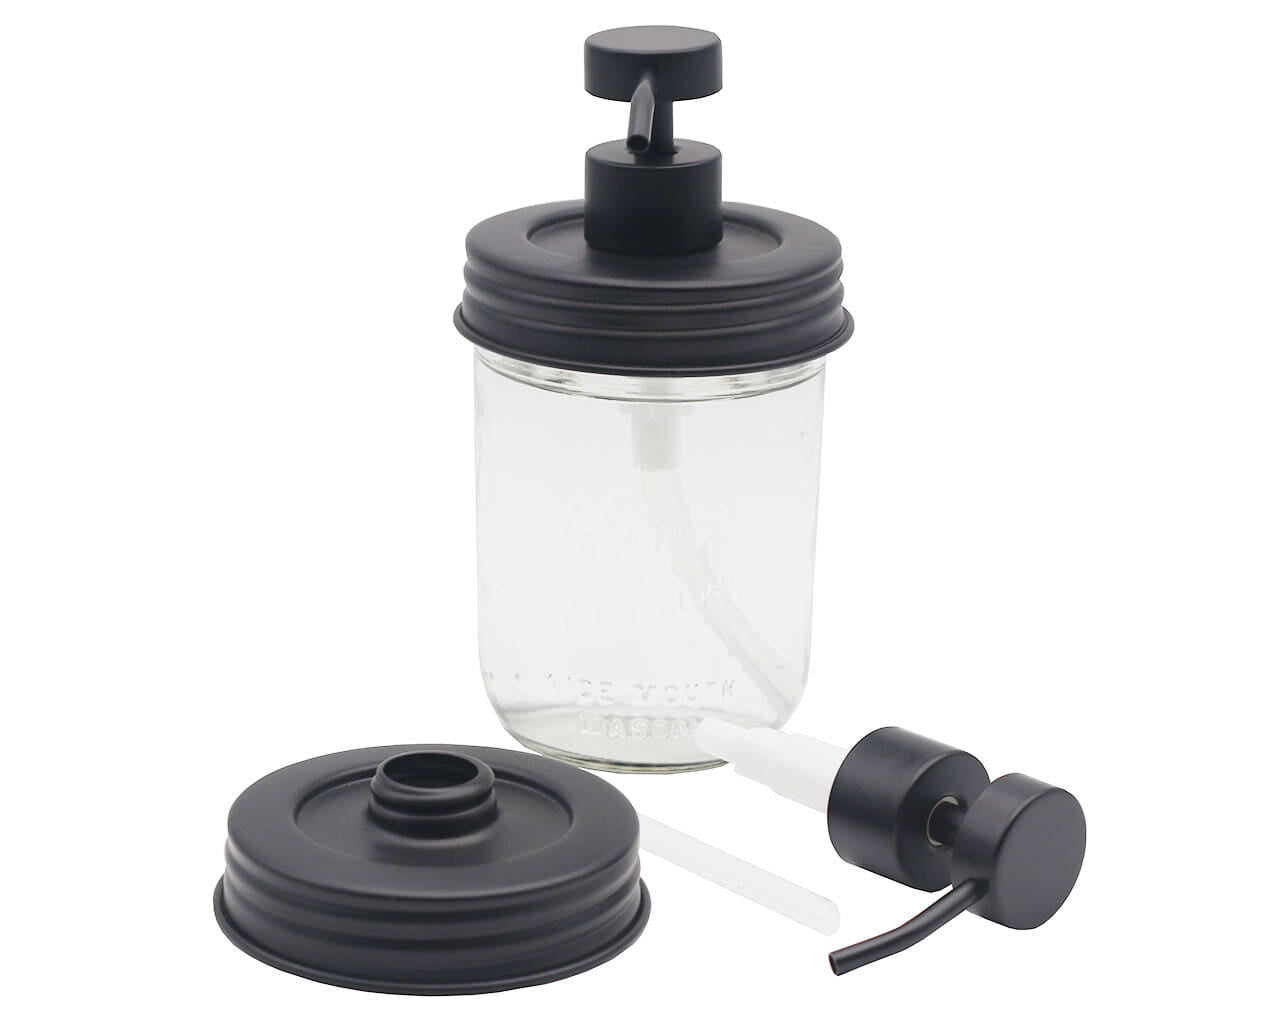 Threaded Matte Charcoal Black Soap Dispenser Lid for Wide Mouth Mason Jars Style #2